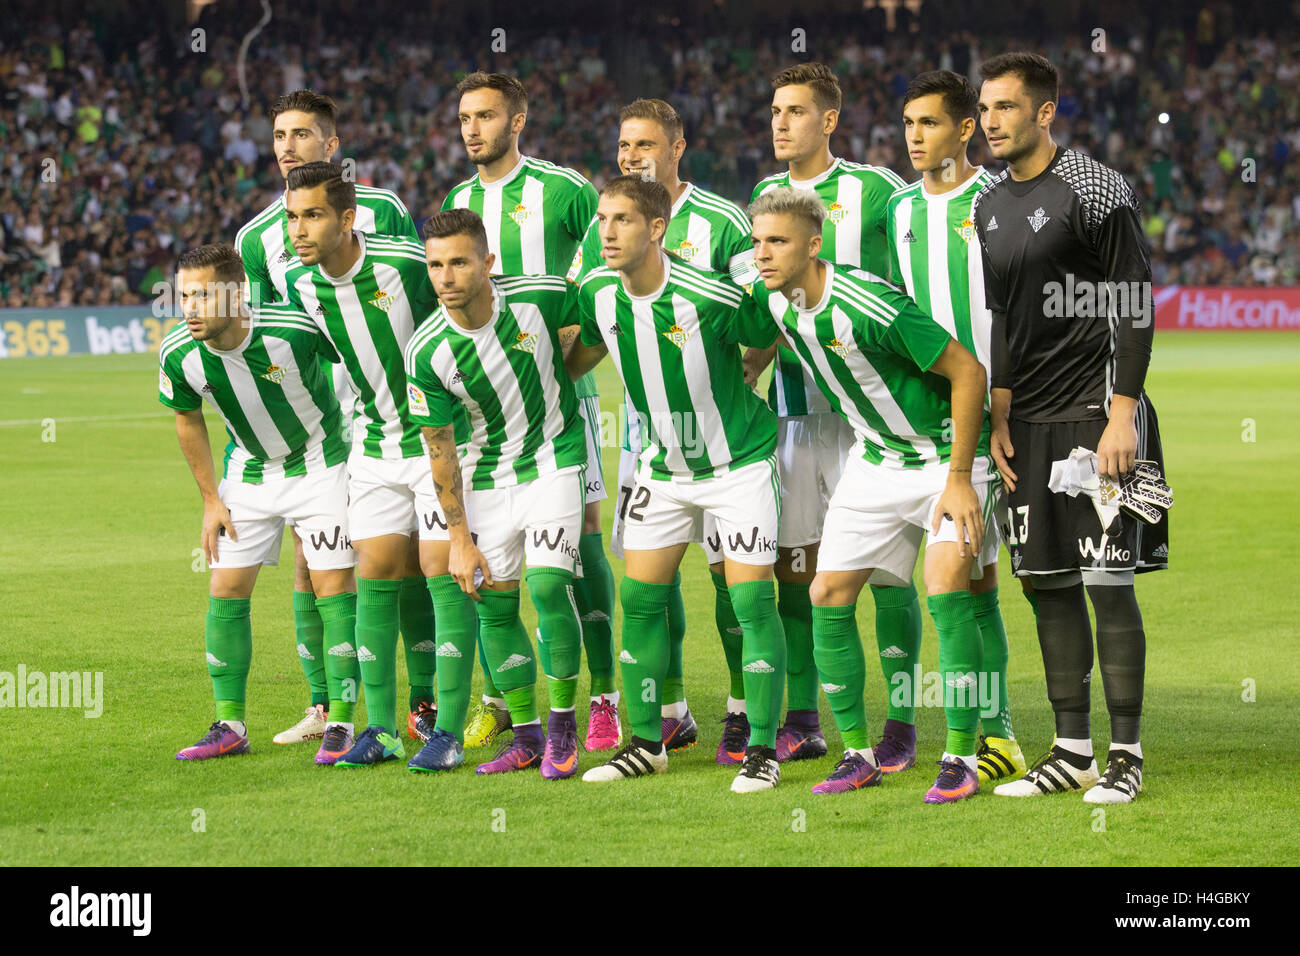 Seville, Spain. 15th October, 2016. - Real Betis  line up for team photo prior to the start the La Liga  match between  Real Betis B. vs Real Madrid as part of La Liga at Estadio Benito Villamarin on October 15, 2016 in Seville Photo by Ismael Molina/ Photo Media Express/Alamy Live News Stock Photo